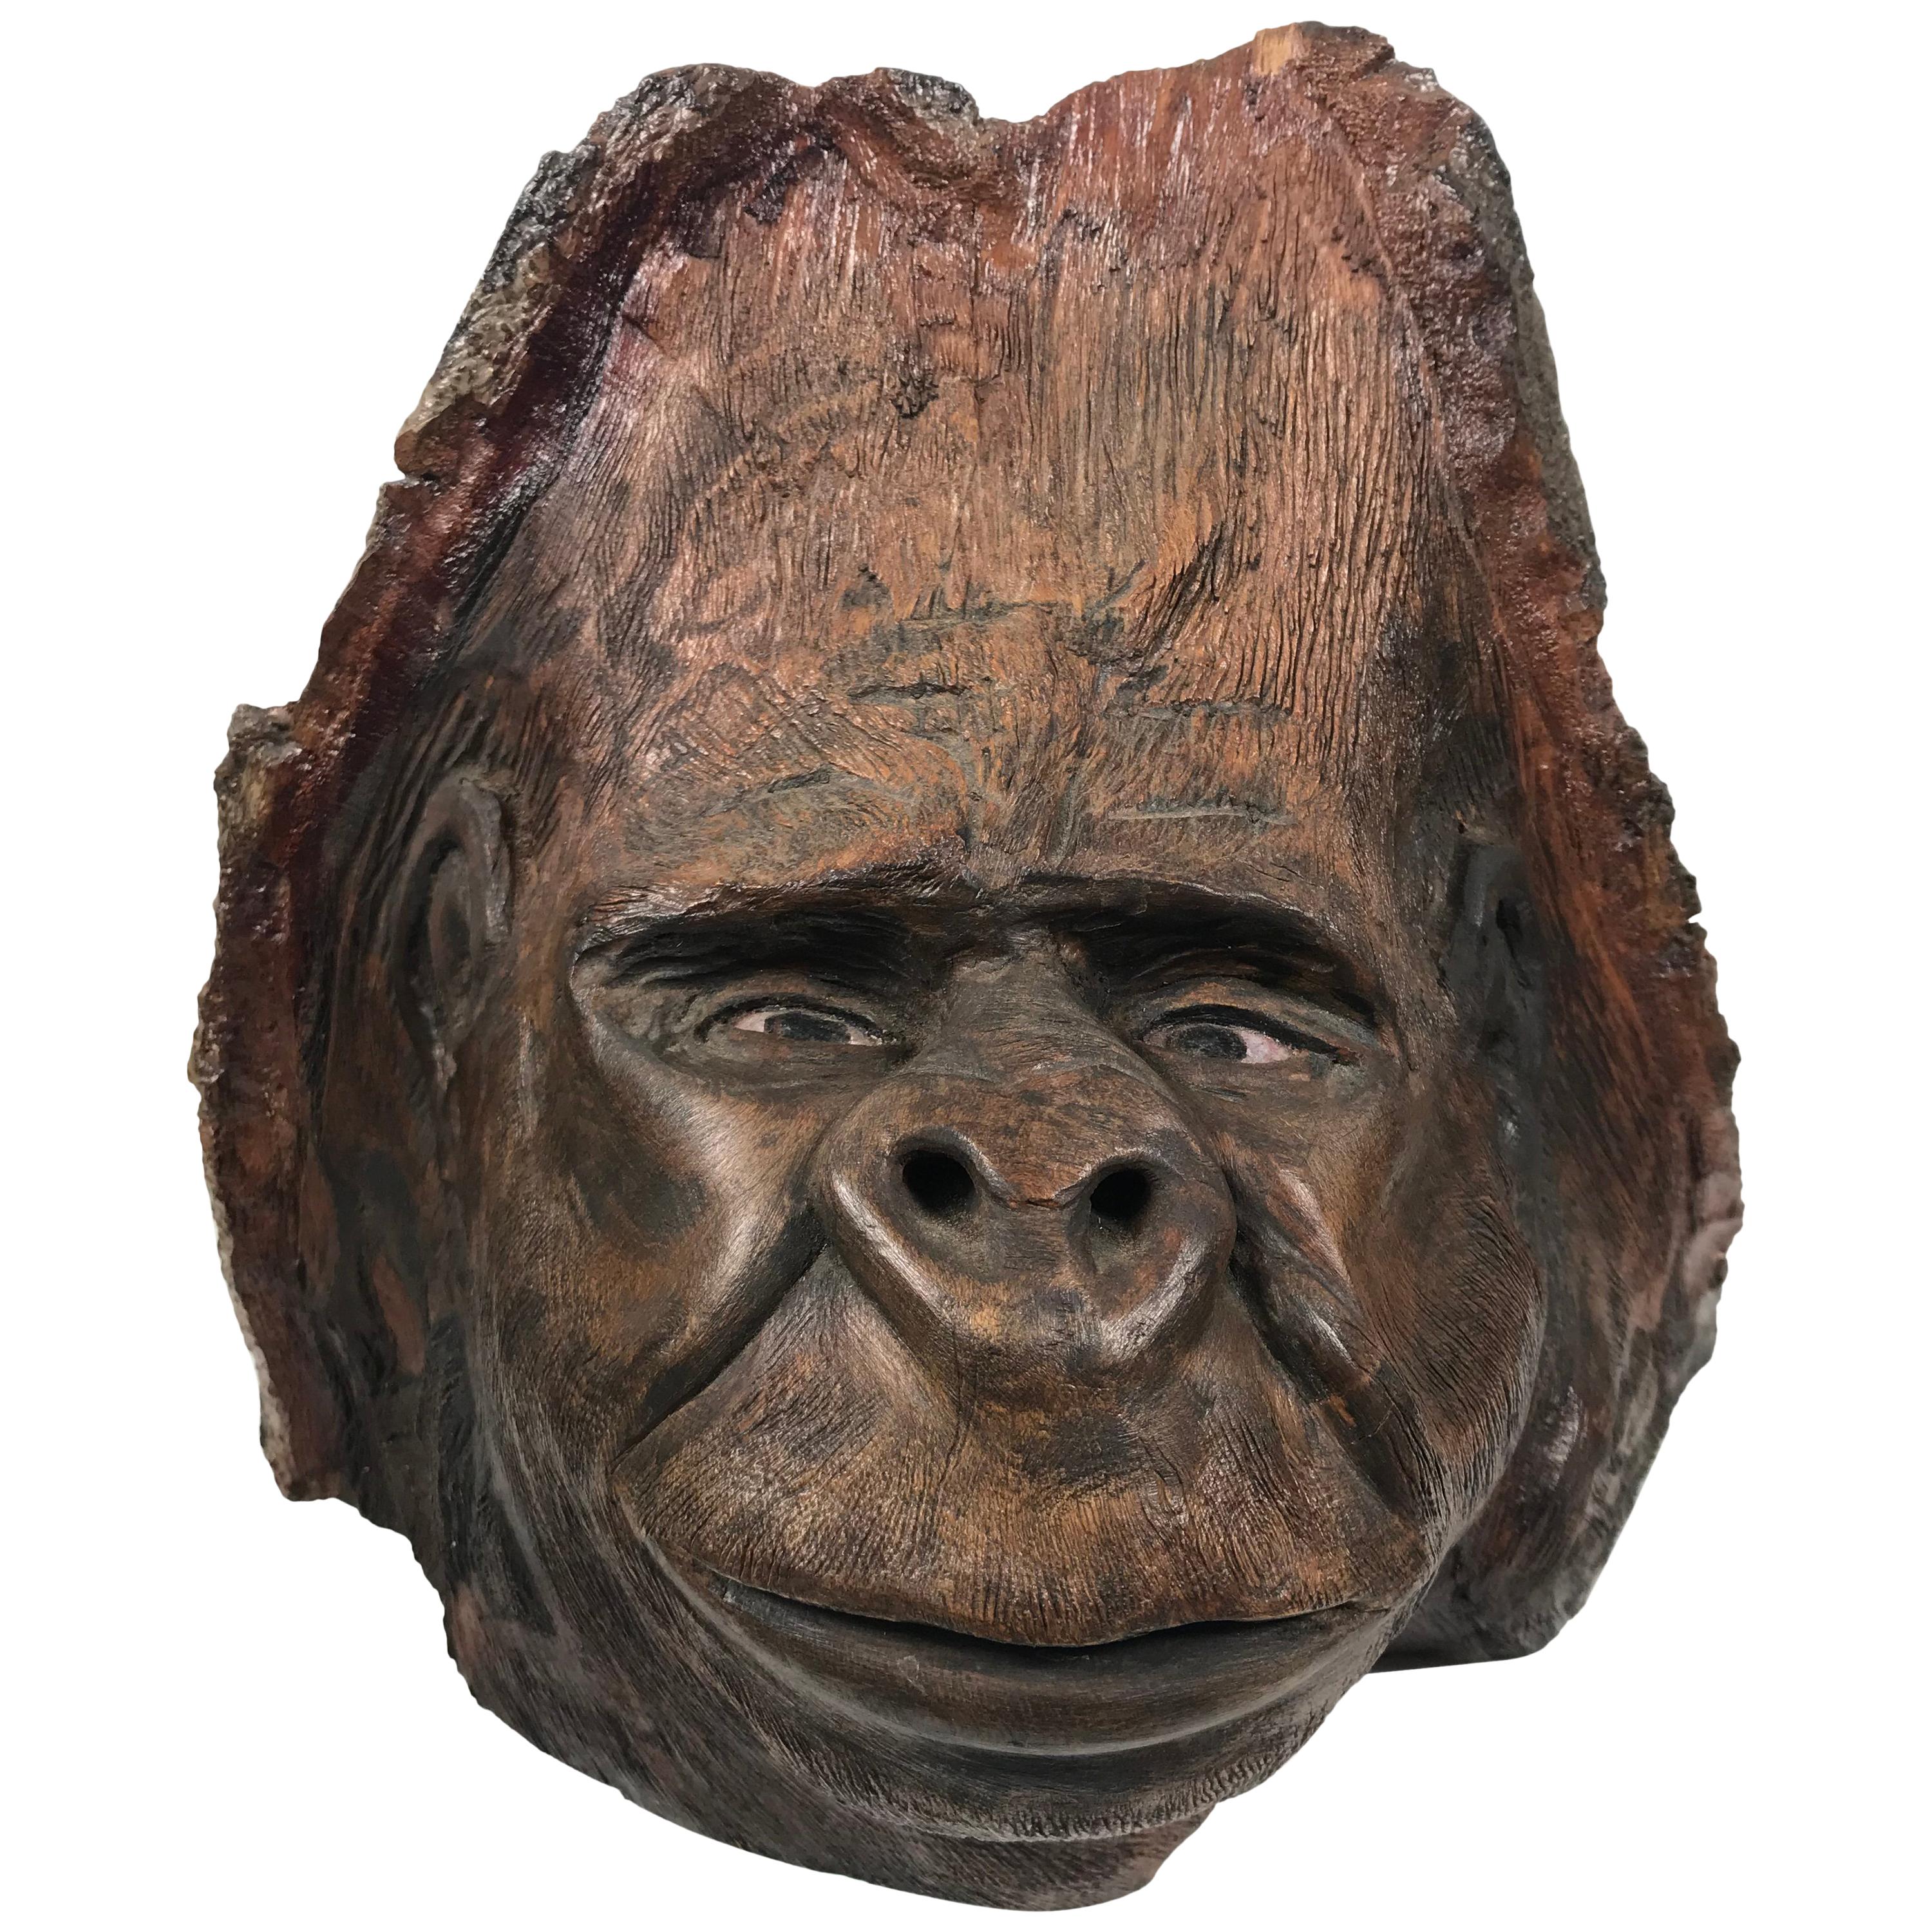 Extraordinary Hand-Carved from Knot of a Tree, Folk Art Sculpture "Gorilla"